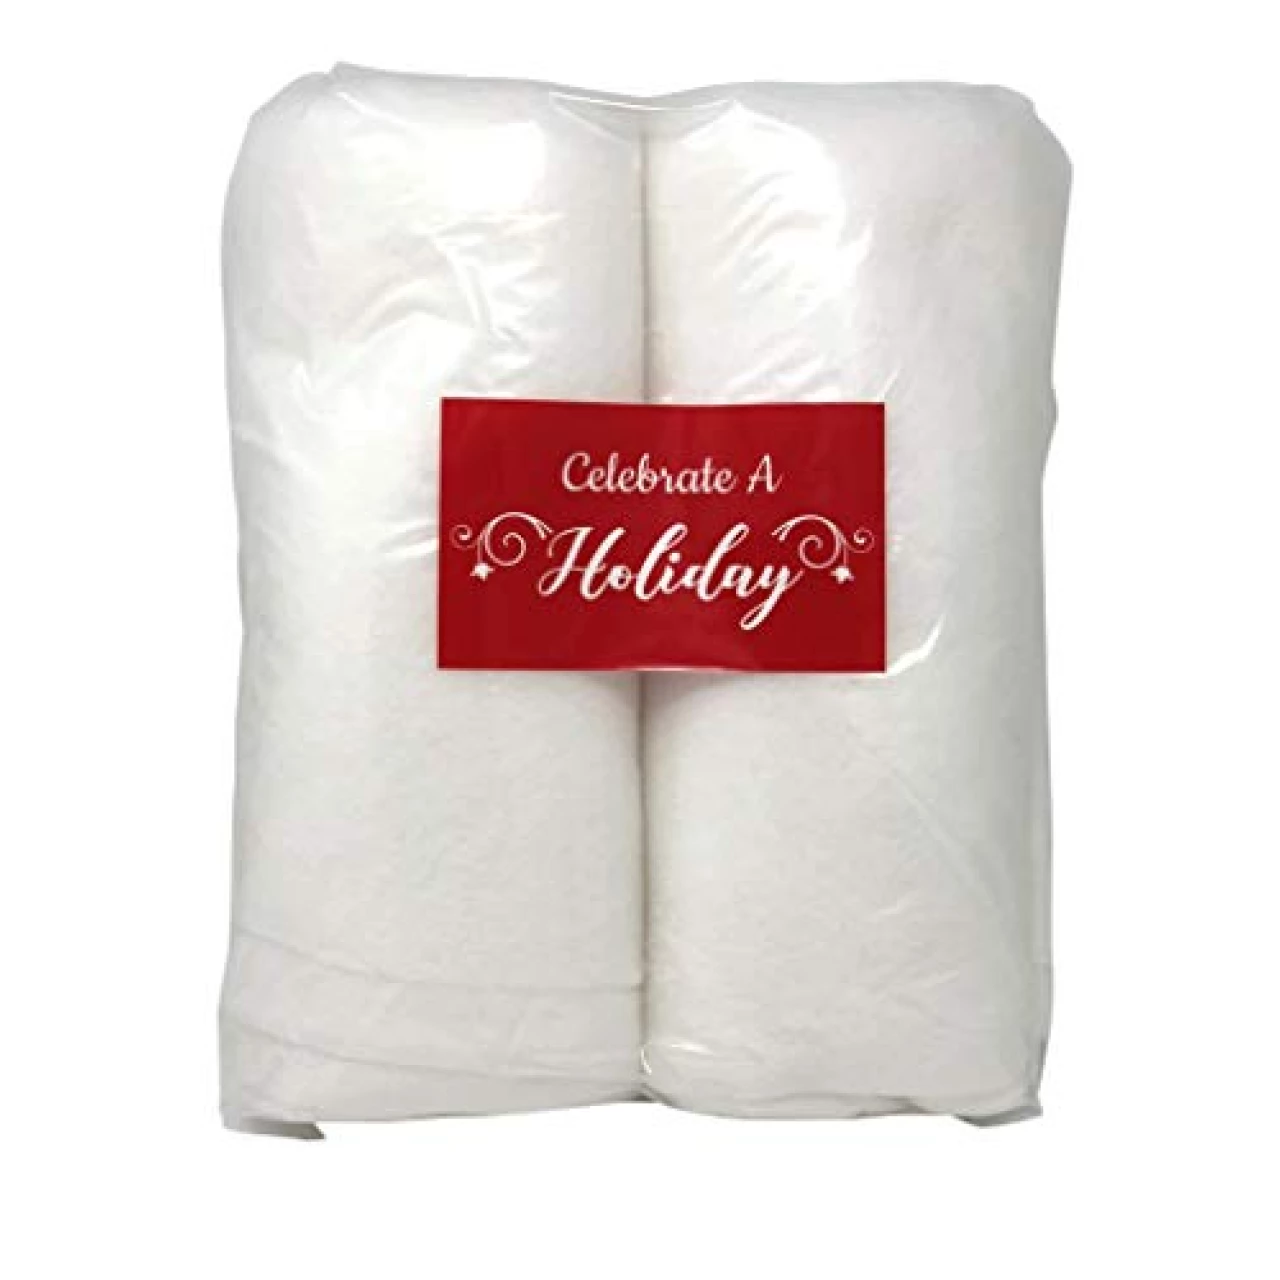 Celebrate A Holiday Christmas Snow Roll - 3 Foot X 8 Foot Artificial Snow Blanket for Christmas Decorations - Fake Snow Blanket for Christmas Villages (2 Pack)